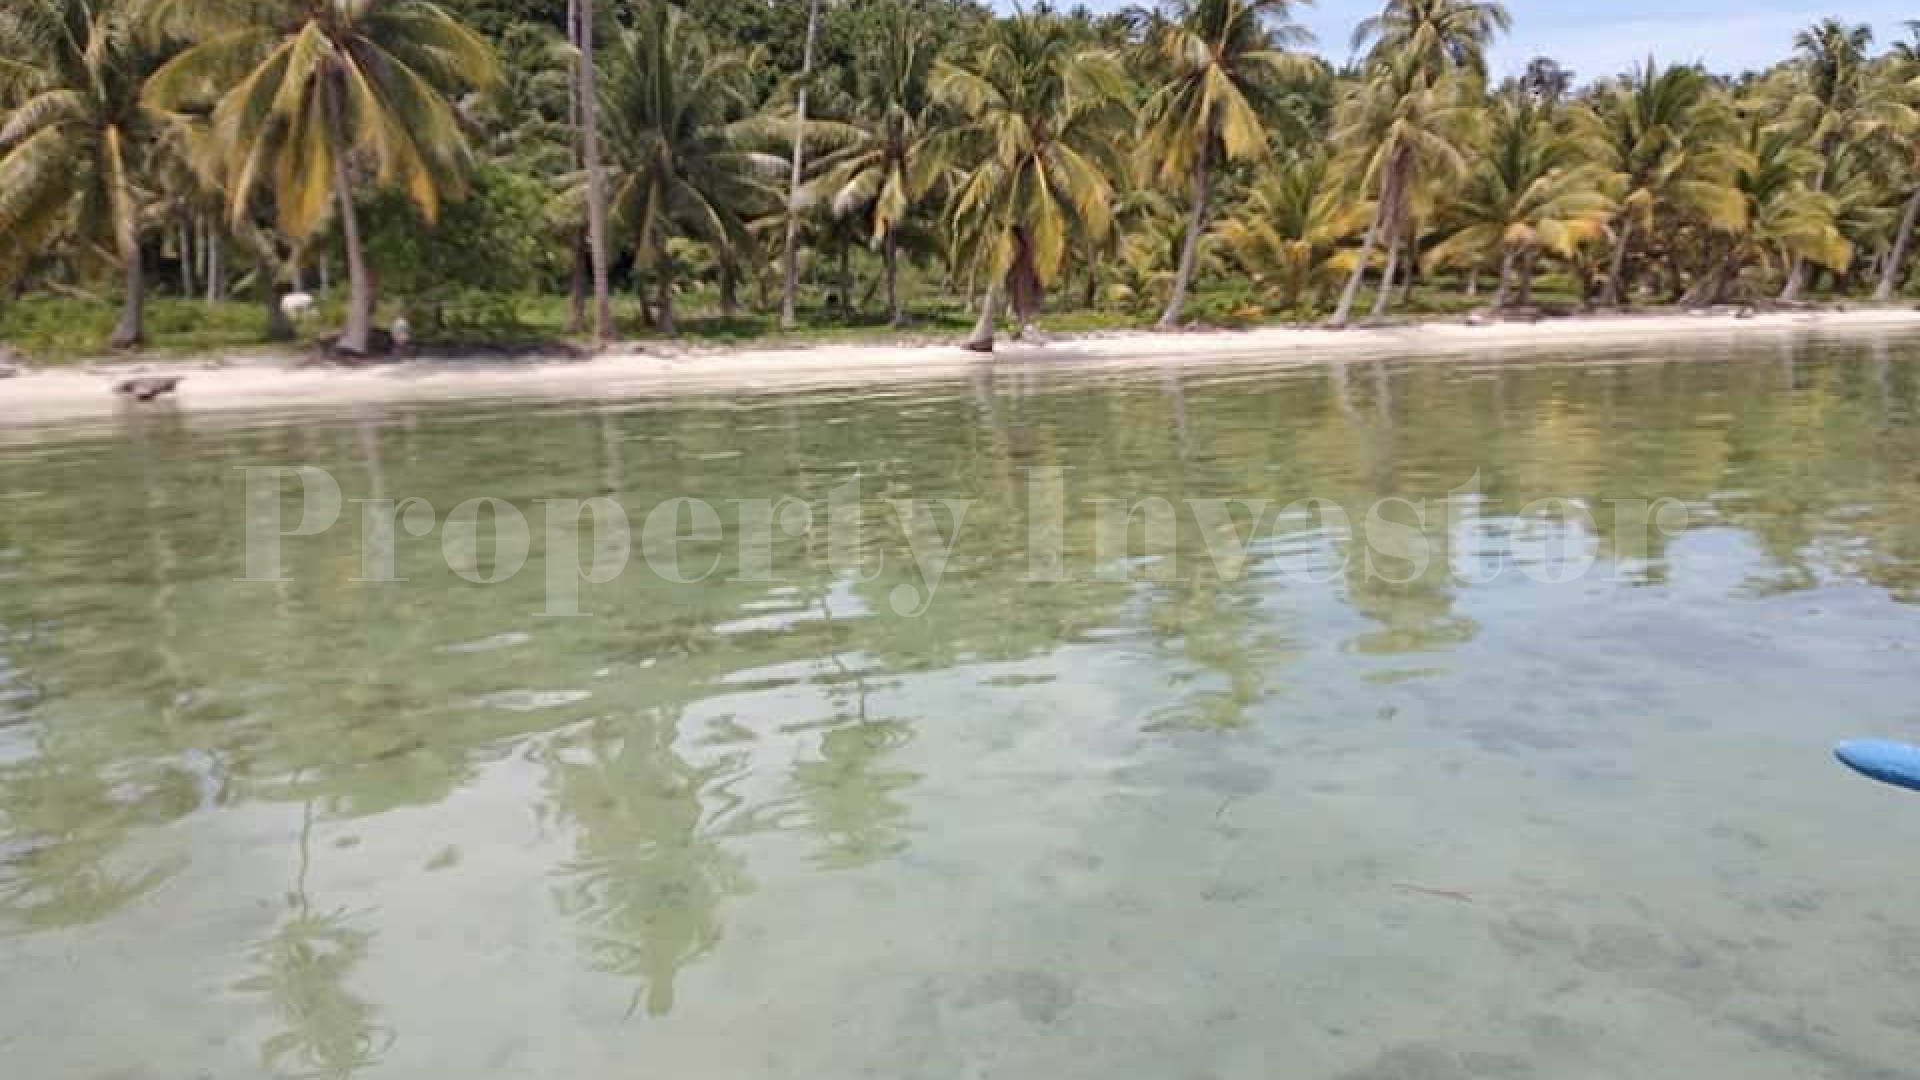 Exclusive 20.8 Hectare Parcel of Beautiful Beachfront Land for Sale in Balabac, Palawan